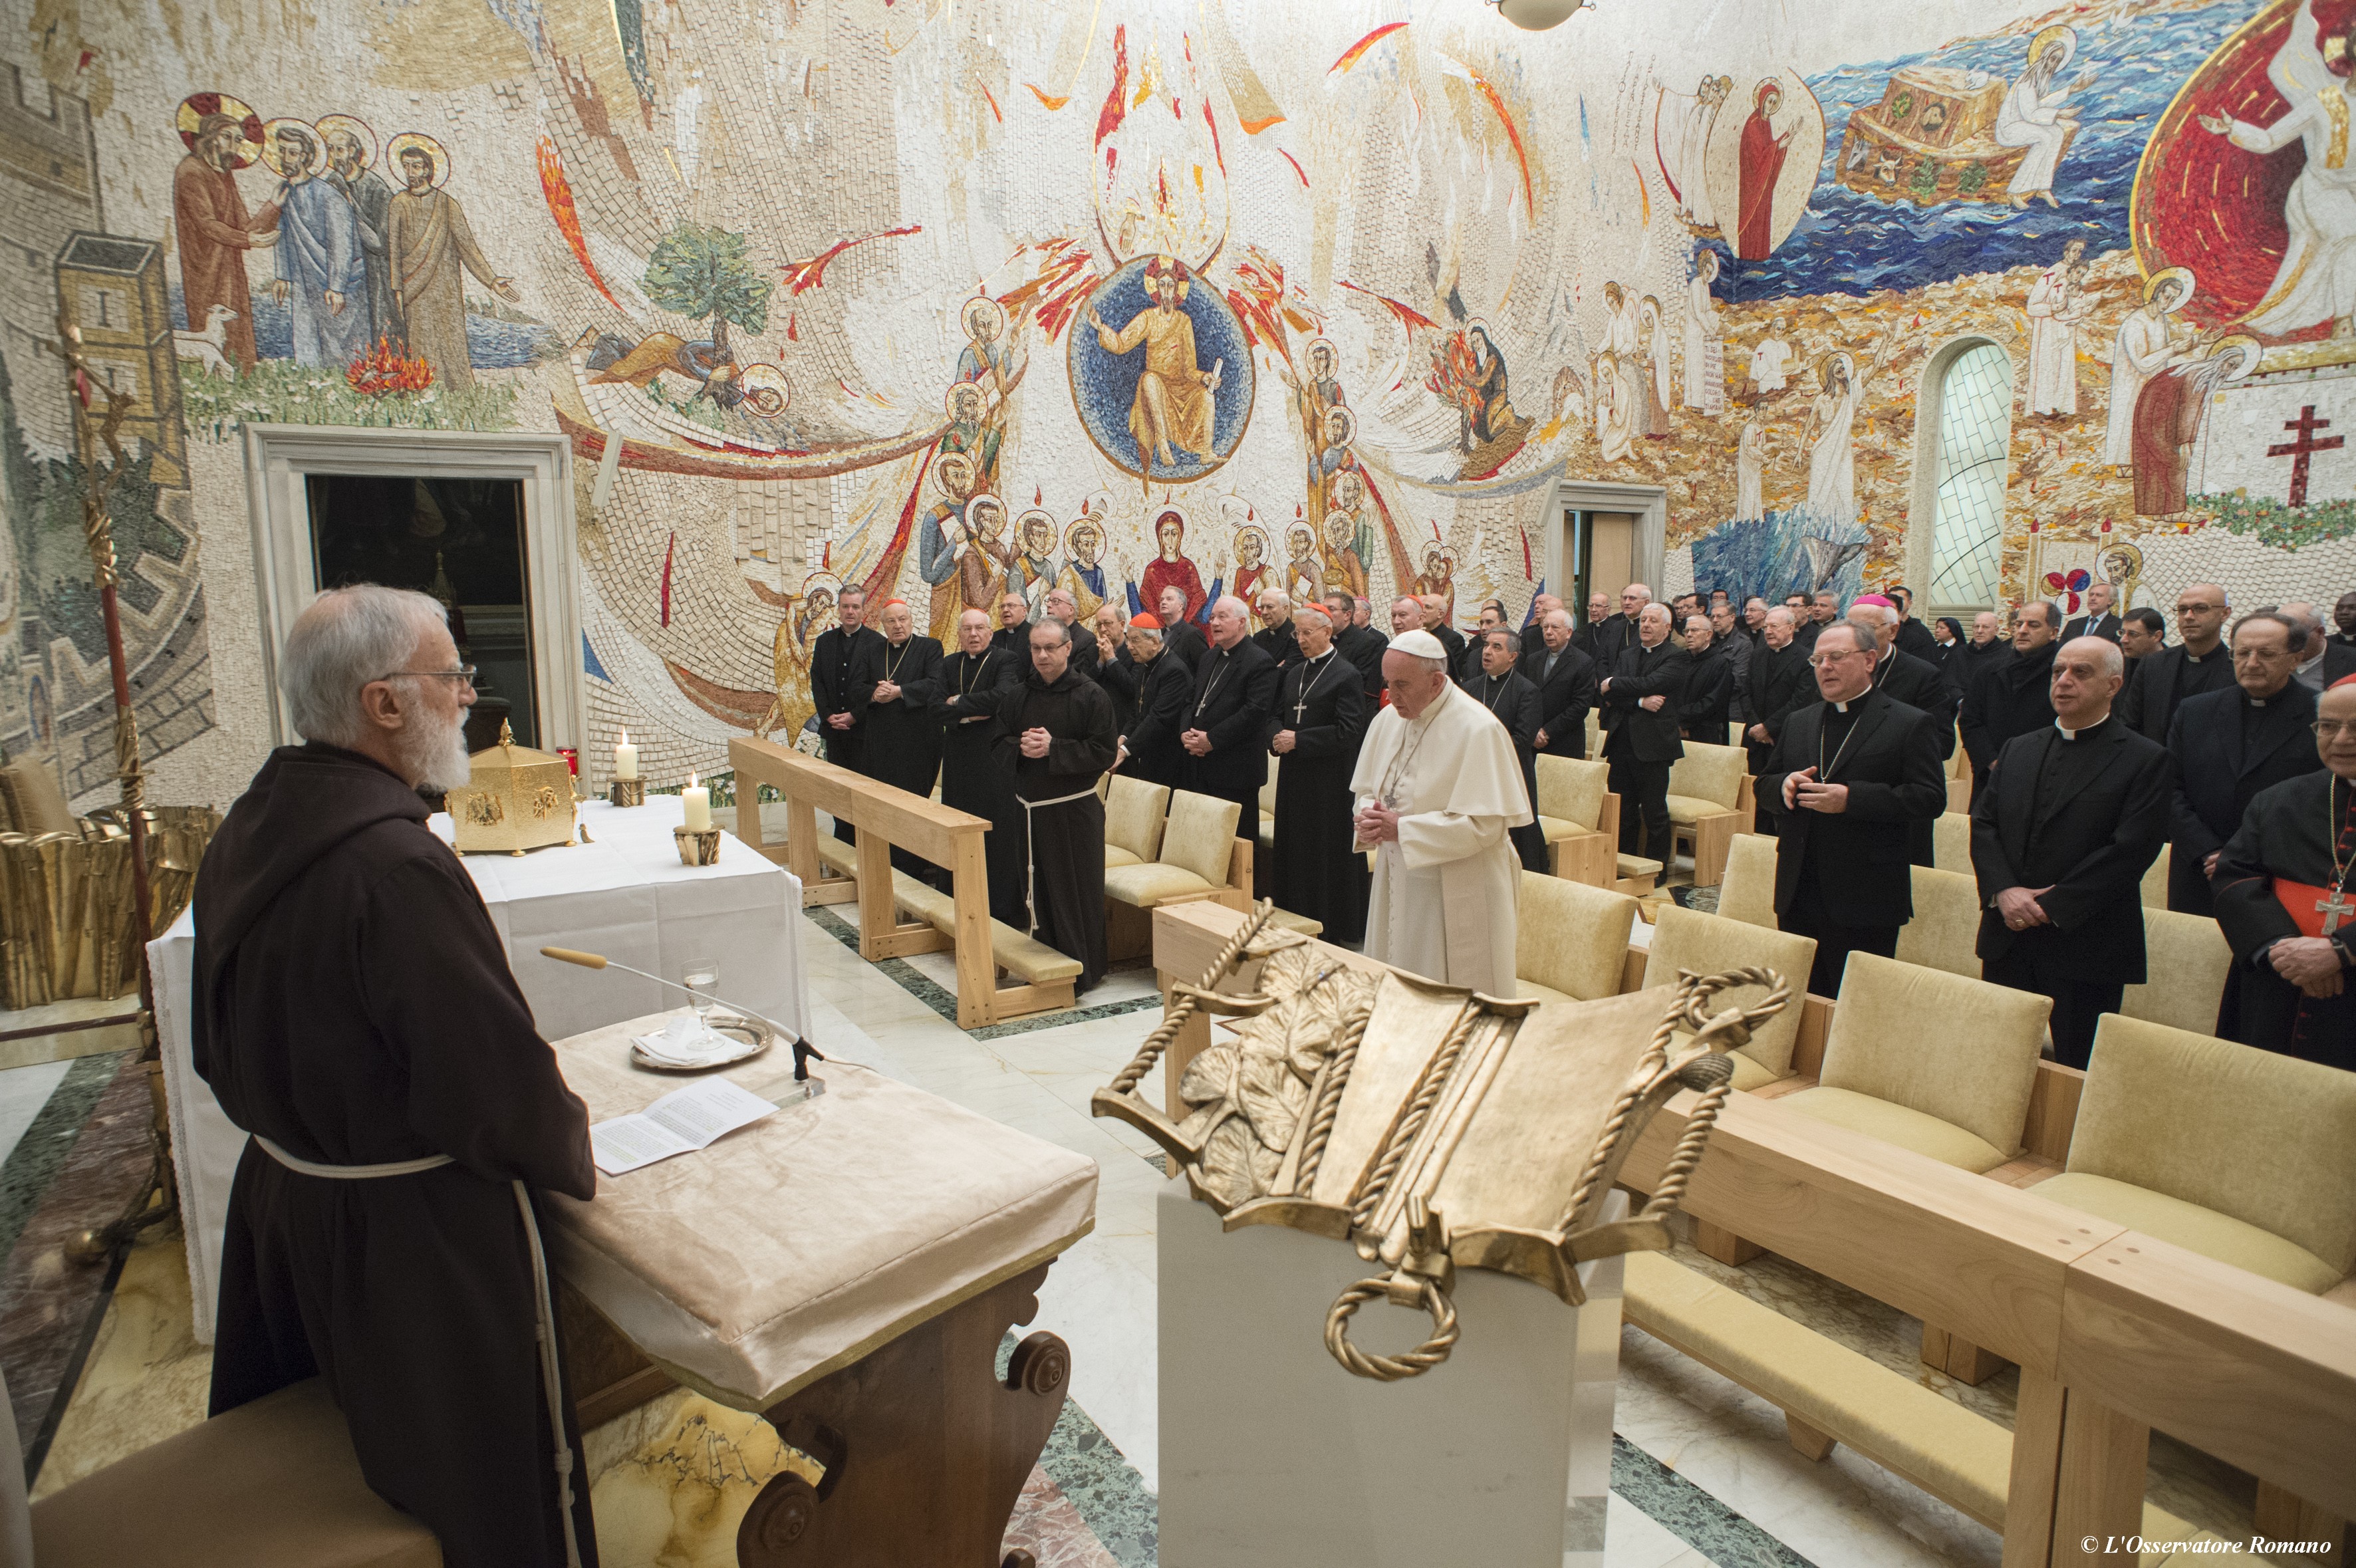 The first Advent homily for 2015 was preached by Fr Raniero Cantalamessa